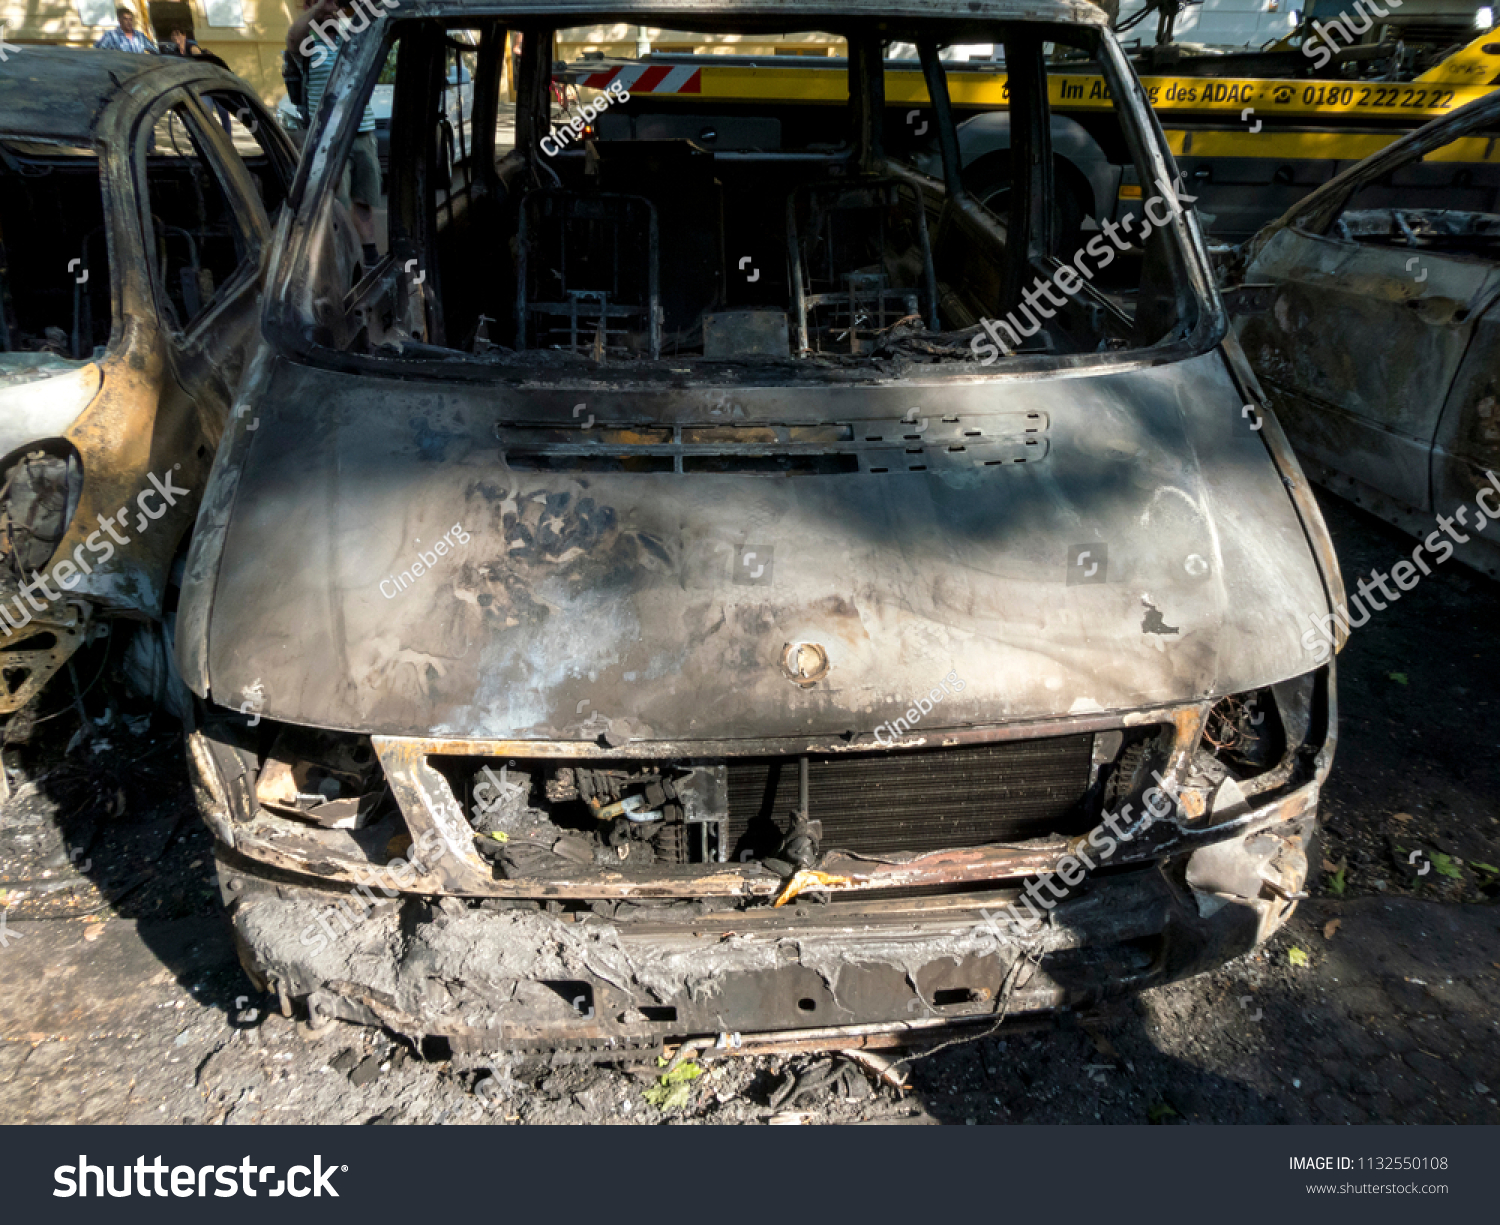 Berlin, Germany - June 16, 2018: Completely burnt out cars #1132550108